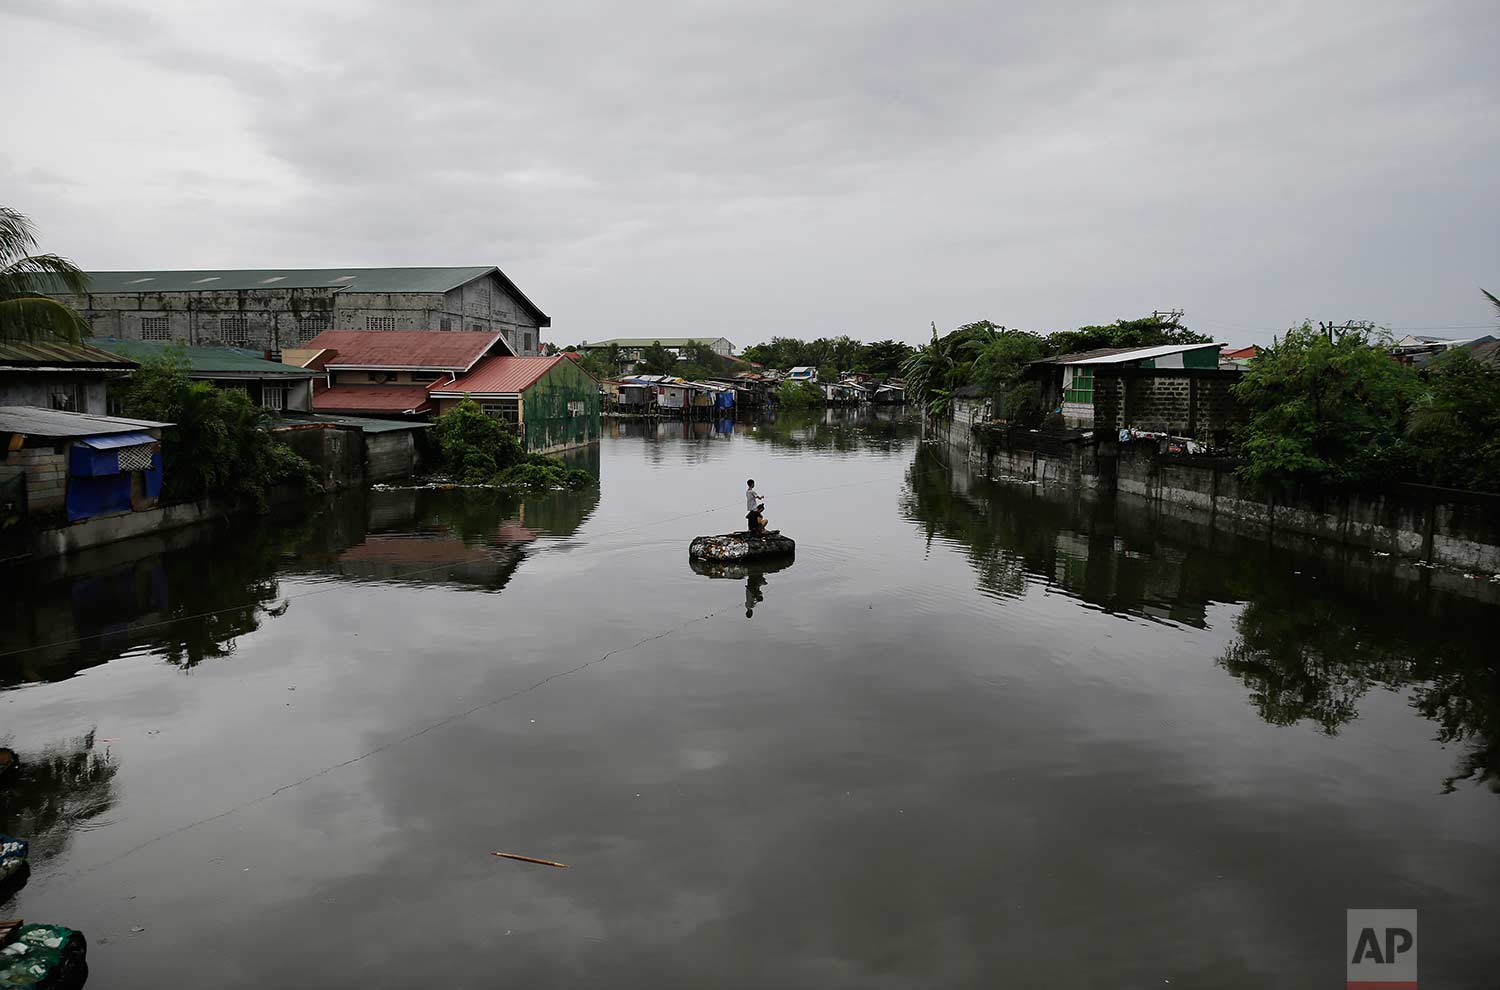 Residents pull a rope in an improvised raft to cross a swollen river caused by tropical storm Gorio on the outskirts of Manila, Philippines on Wednesday, July 26, 2017. (AP Photo/Aaron Favila)